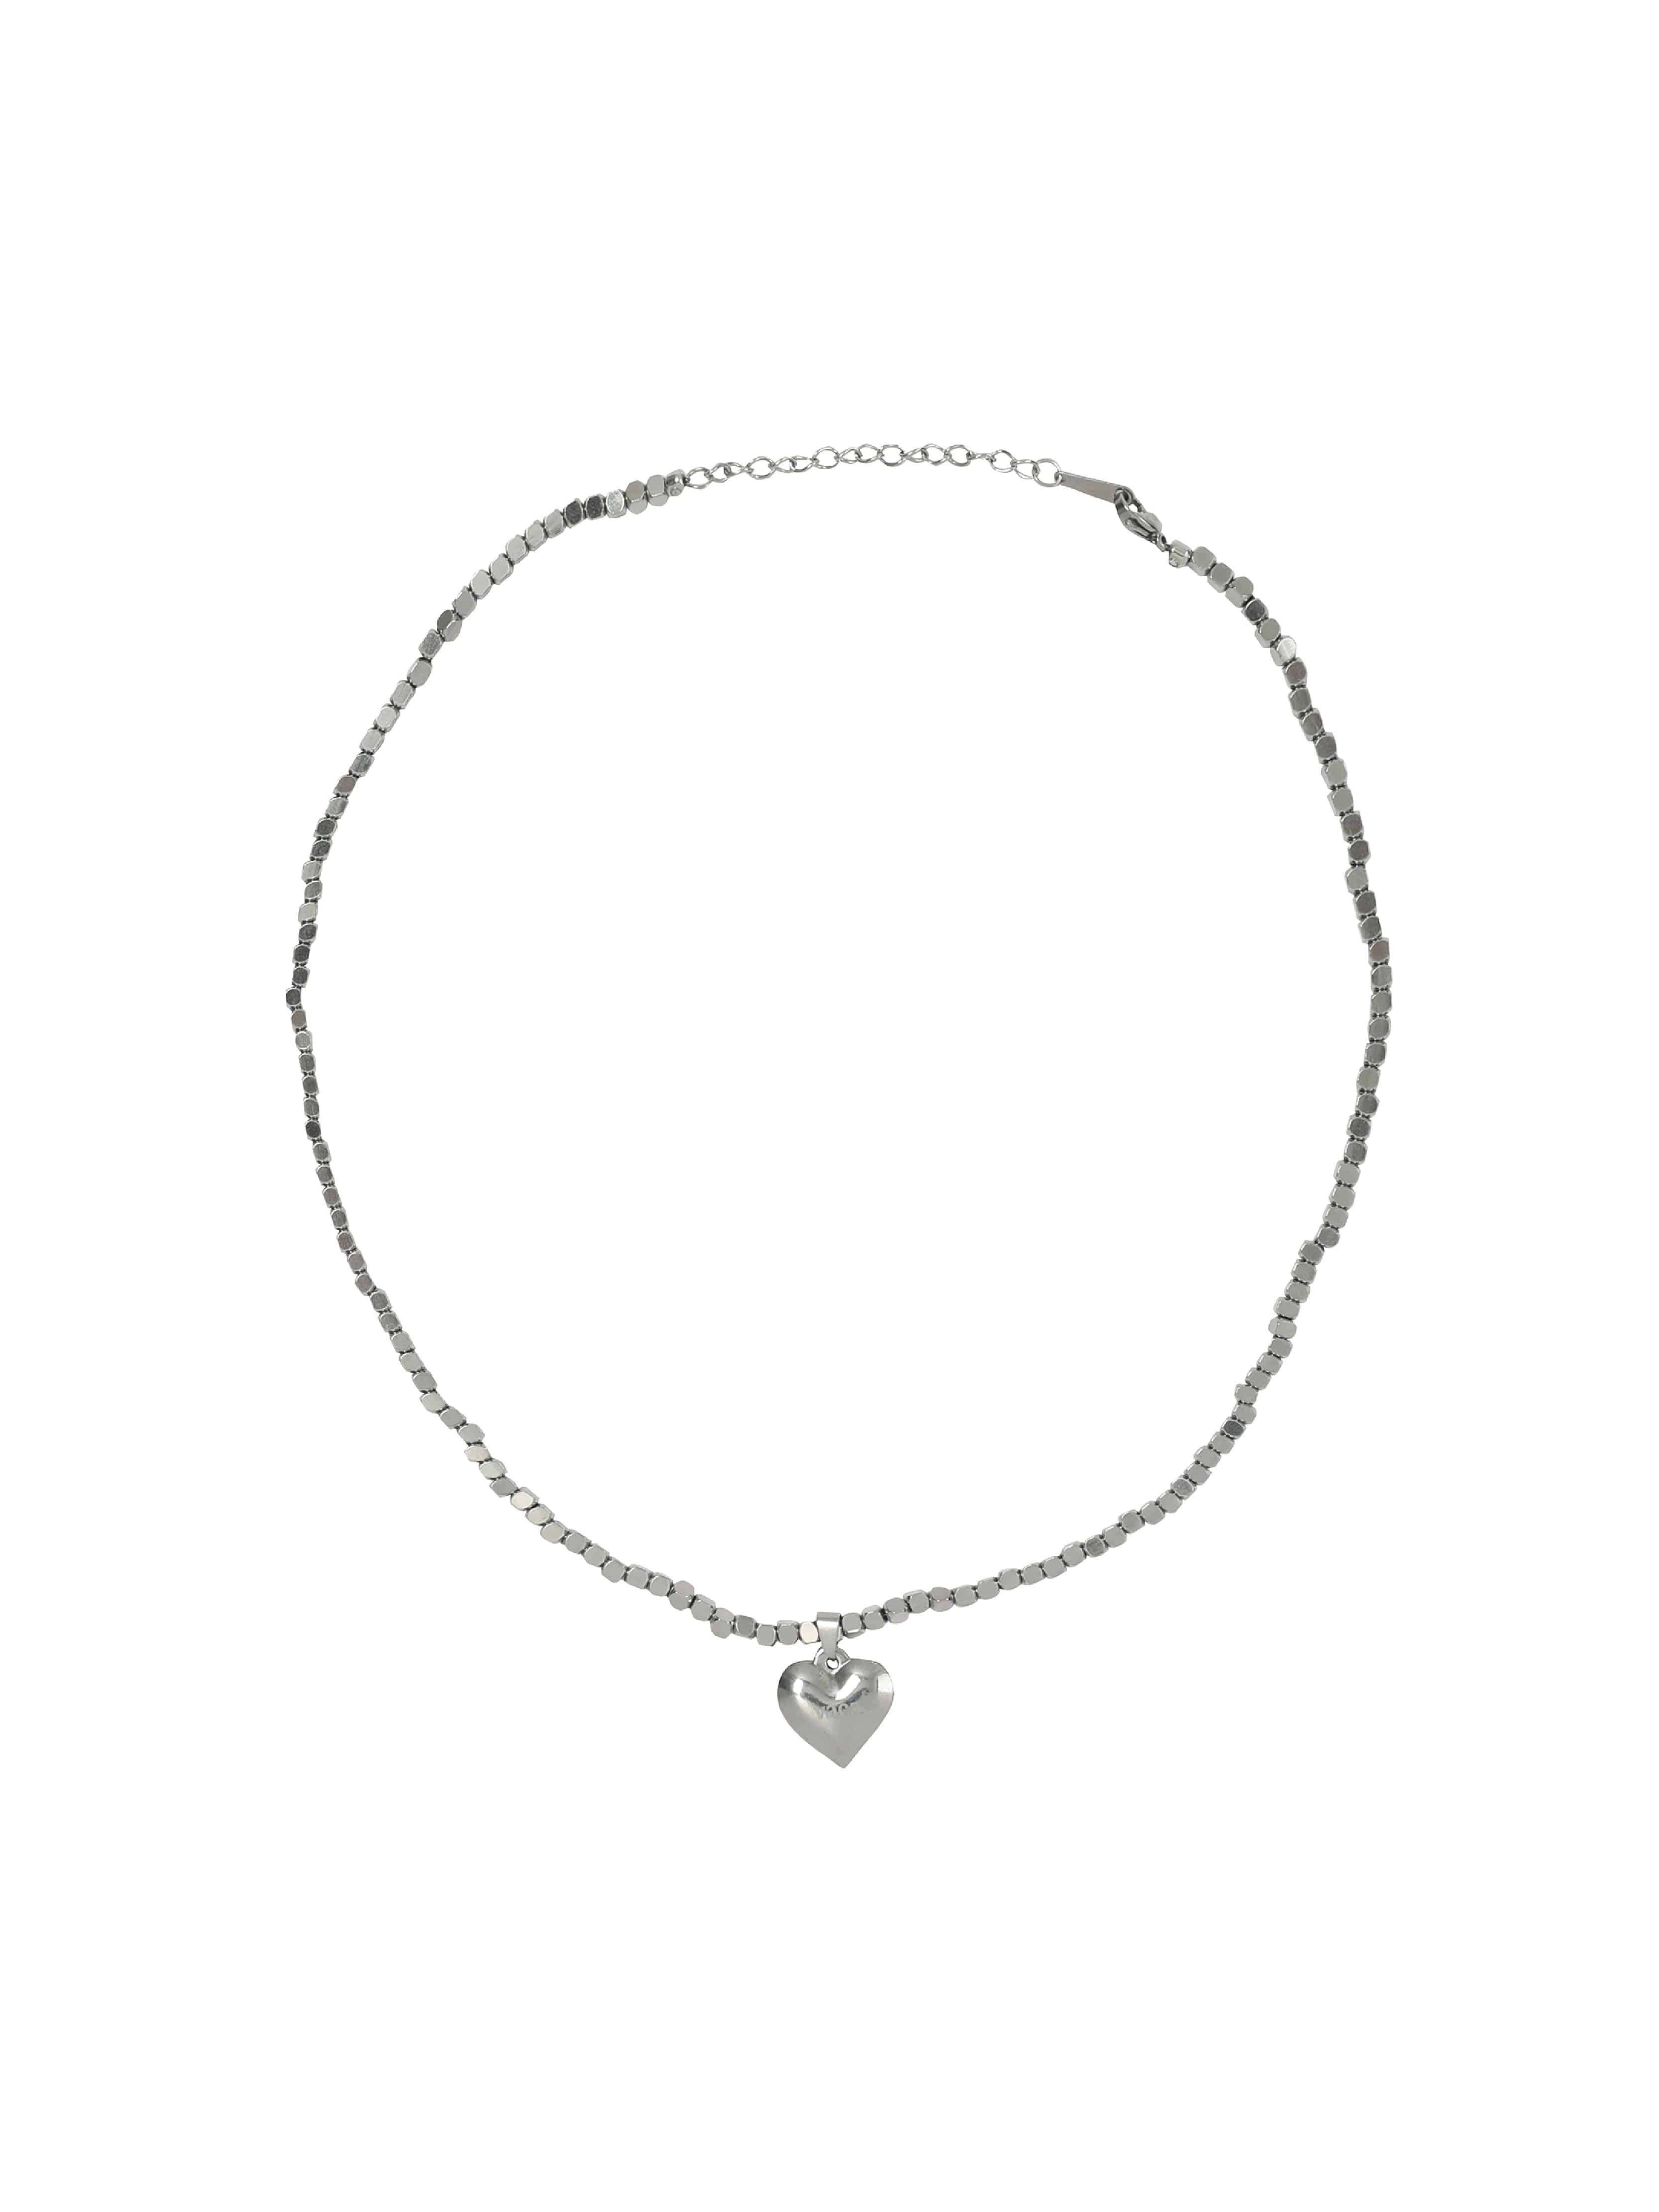 Square Ball Heart Necklace